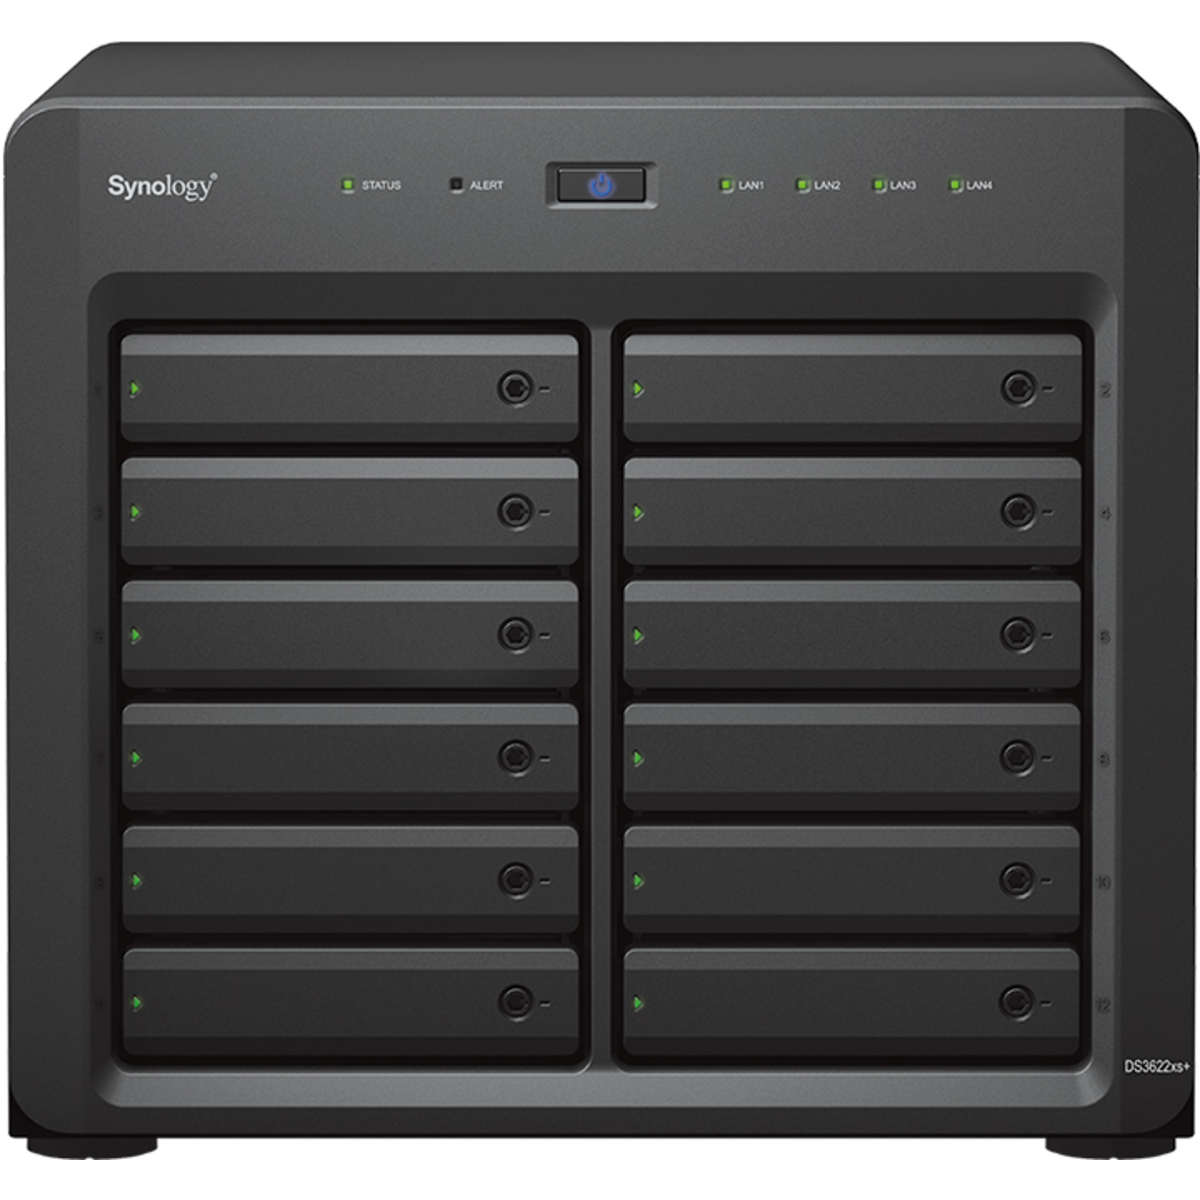 Synology DiskStation DS3622xs+ 288tb 12-Bay Desktop Multimedia / Power User / Business NAS - Network Attached Storage Device 12x24tb Seagate IronWolf Pro ST24000NT002 3.5 7200rpm SATA 6Gb/s HDD NAS Class Drives Installed - Burn-In Tested DiskStation DS3622xs+